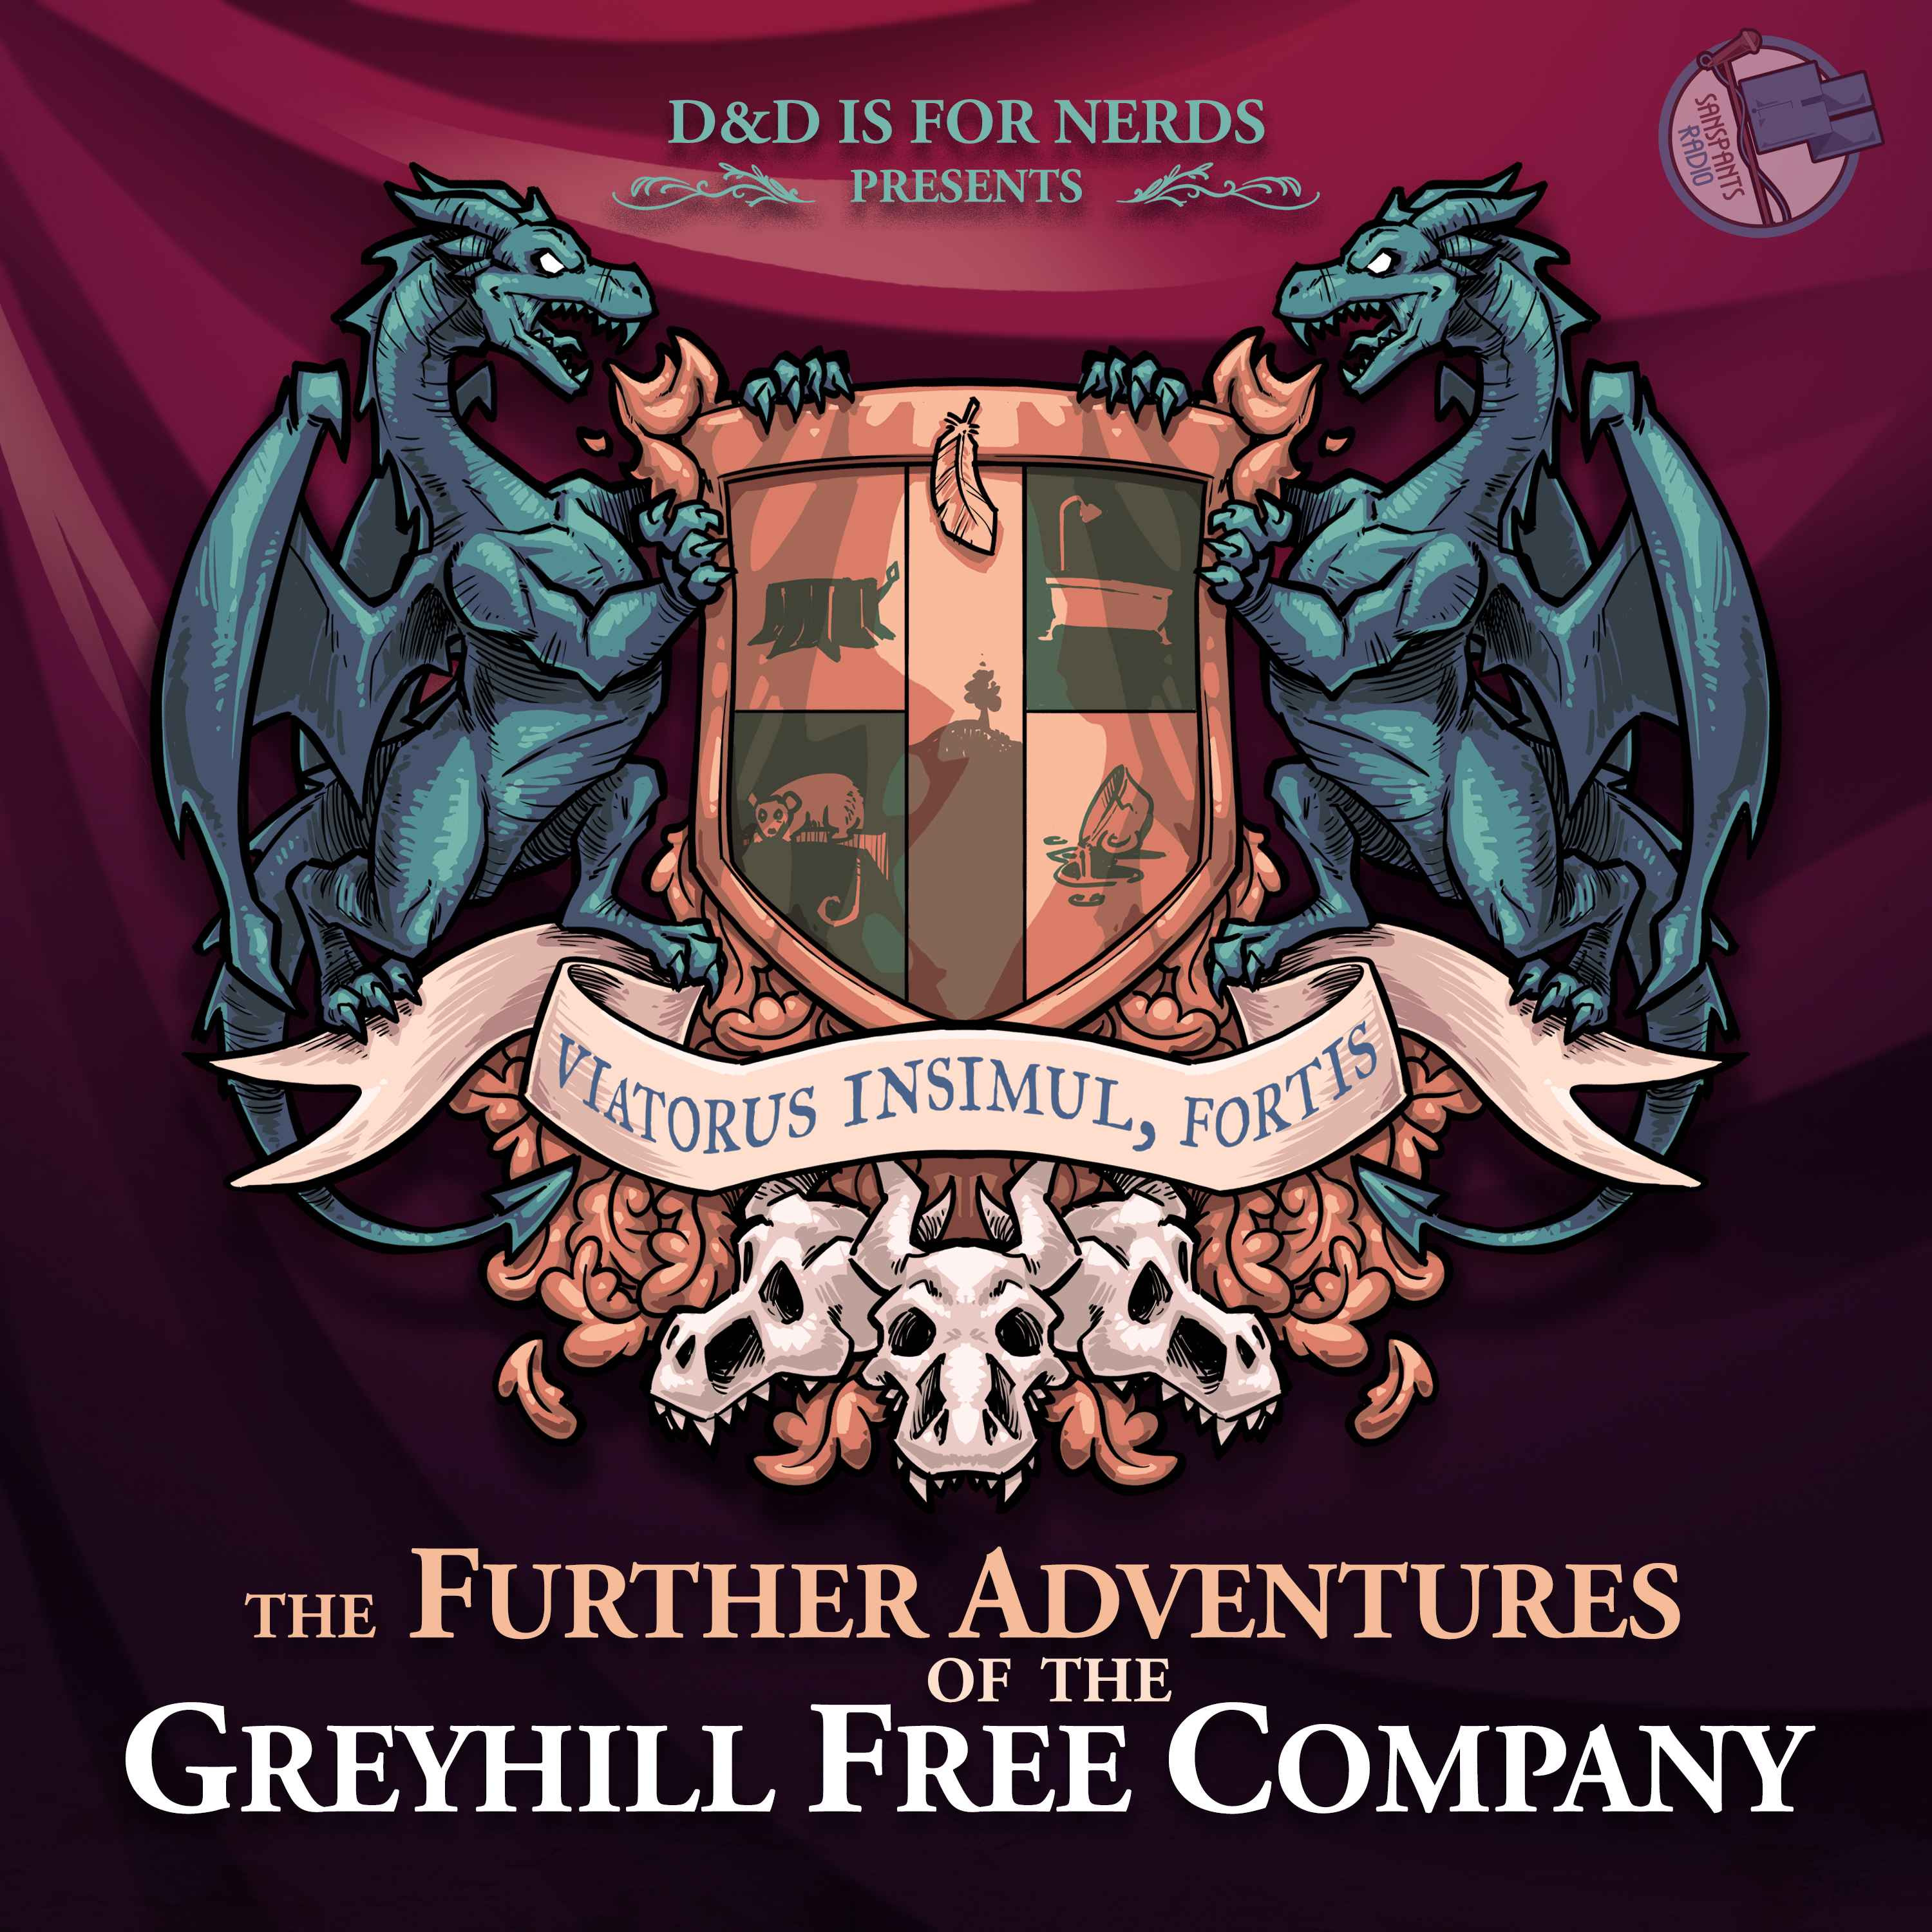 D&D is for Nerds: The Further Adventures of the Greyhill Free Company